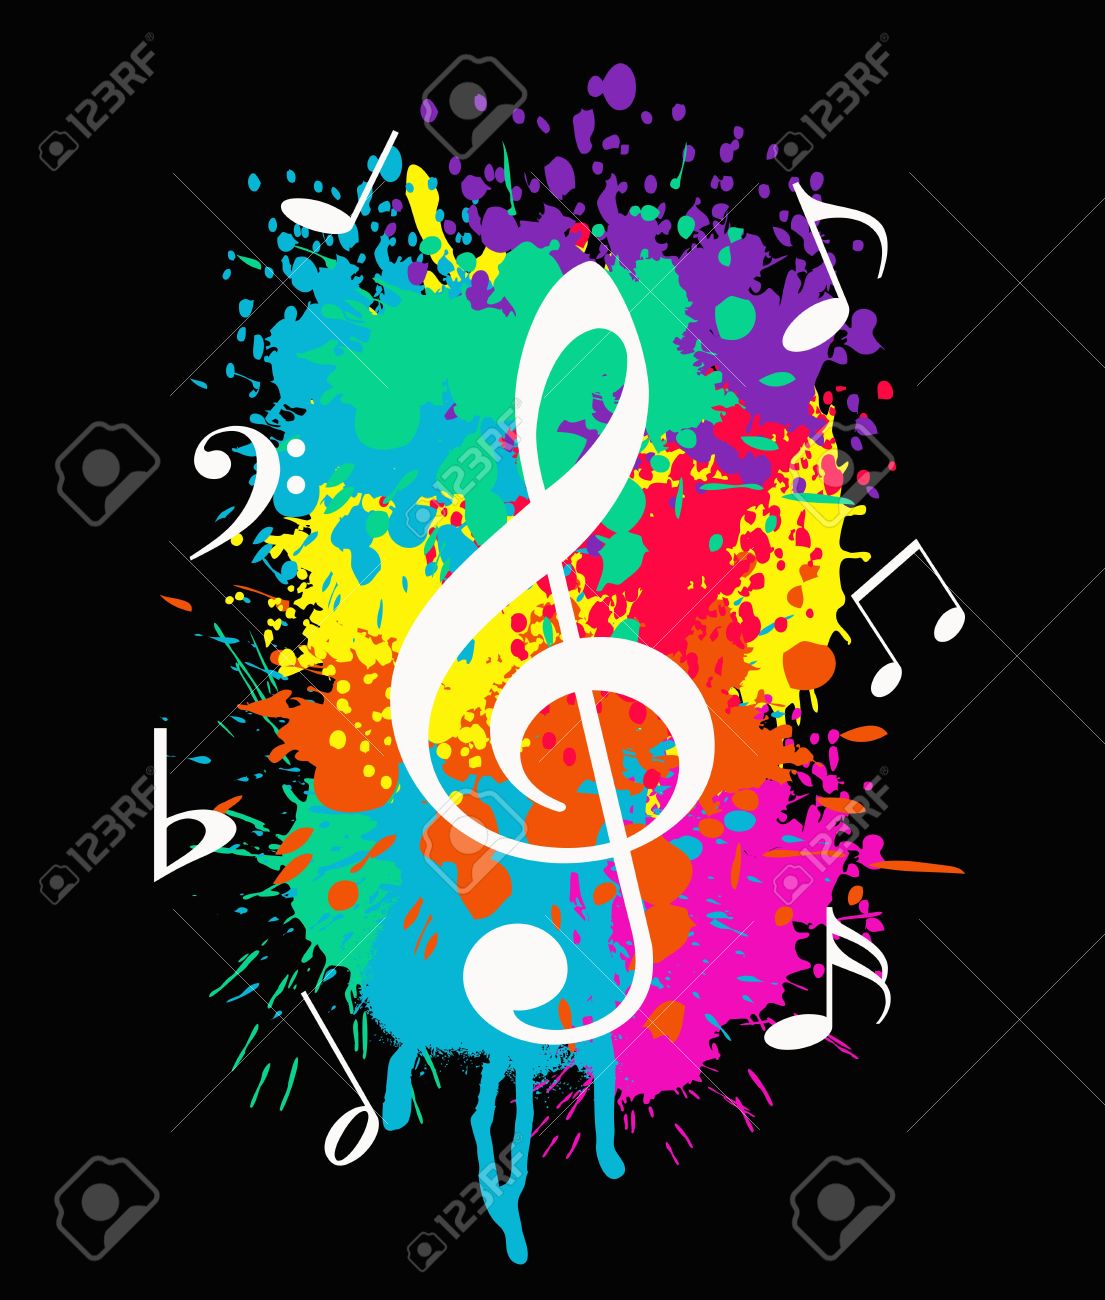 Wallpaper With Music Symbols On Colorful Background Stock Photo